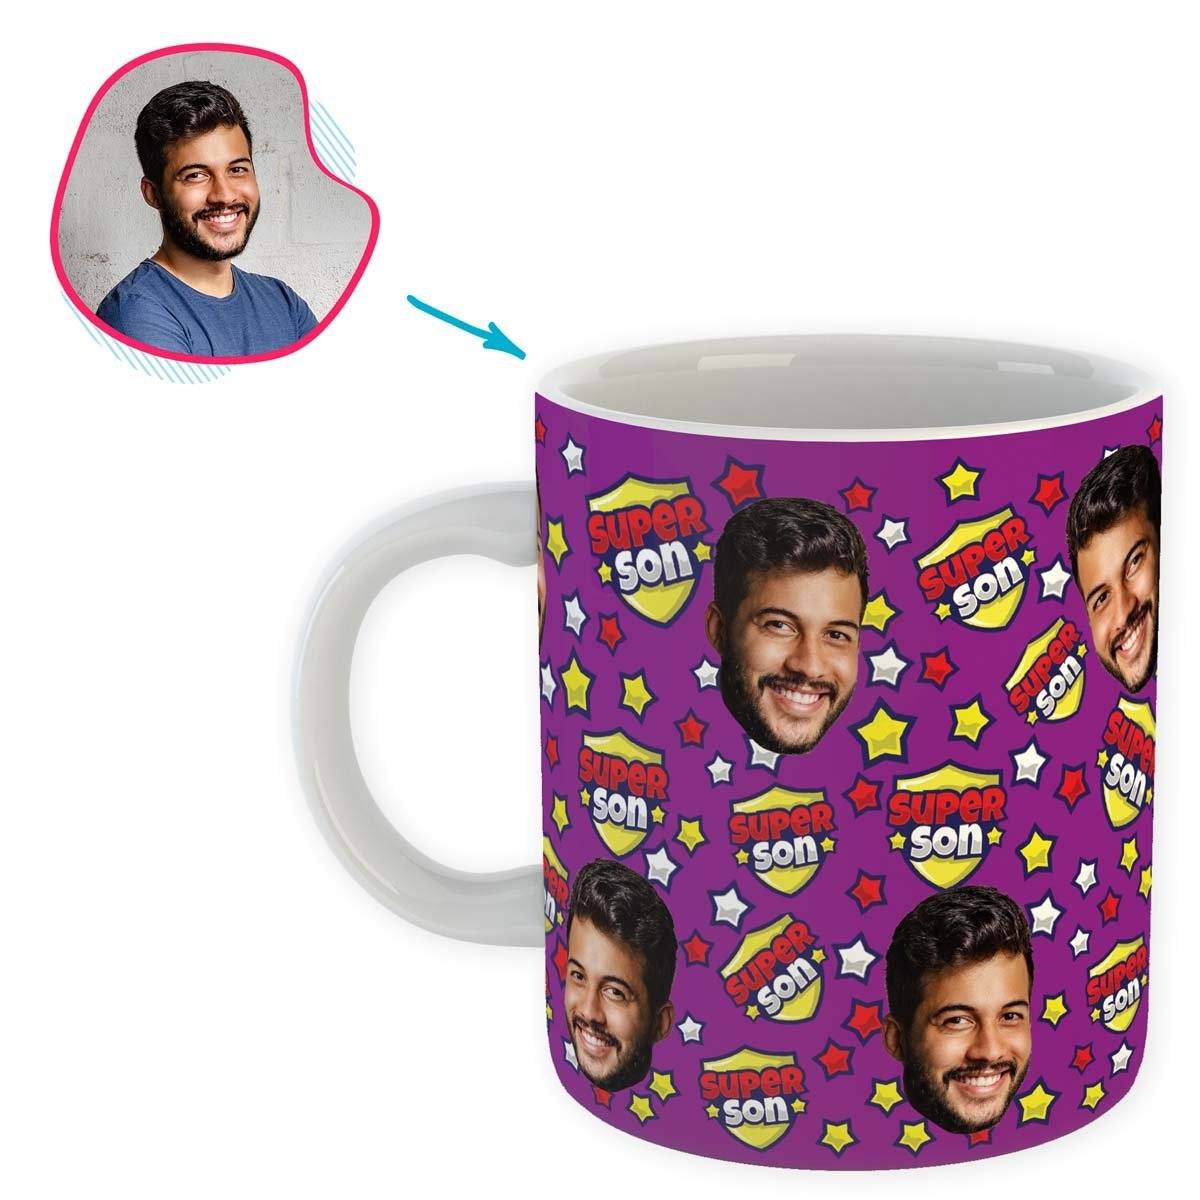 purple Super Son mug personalized with photo of face printed on it